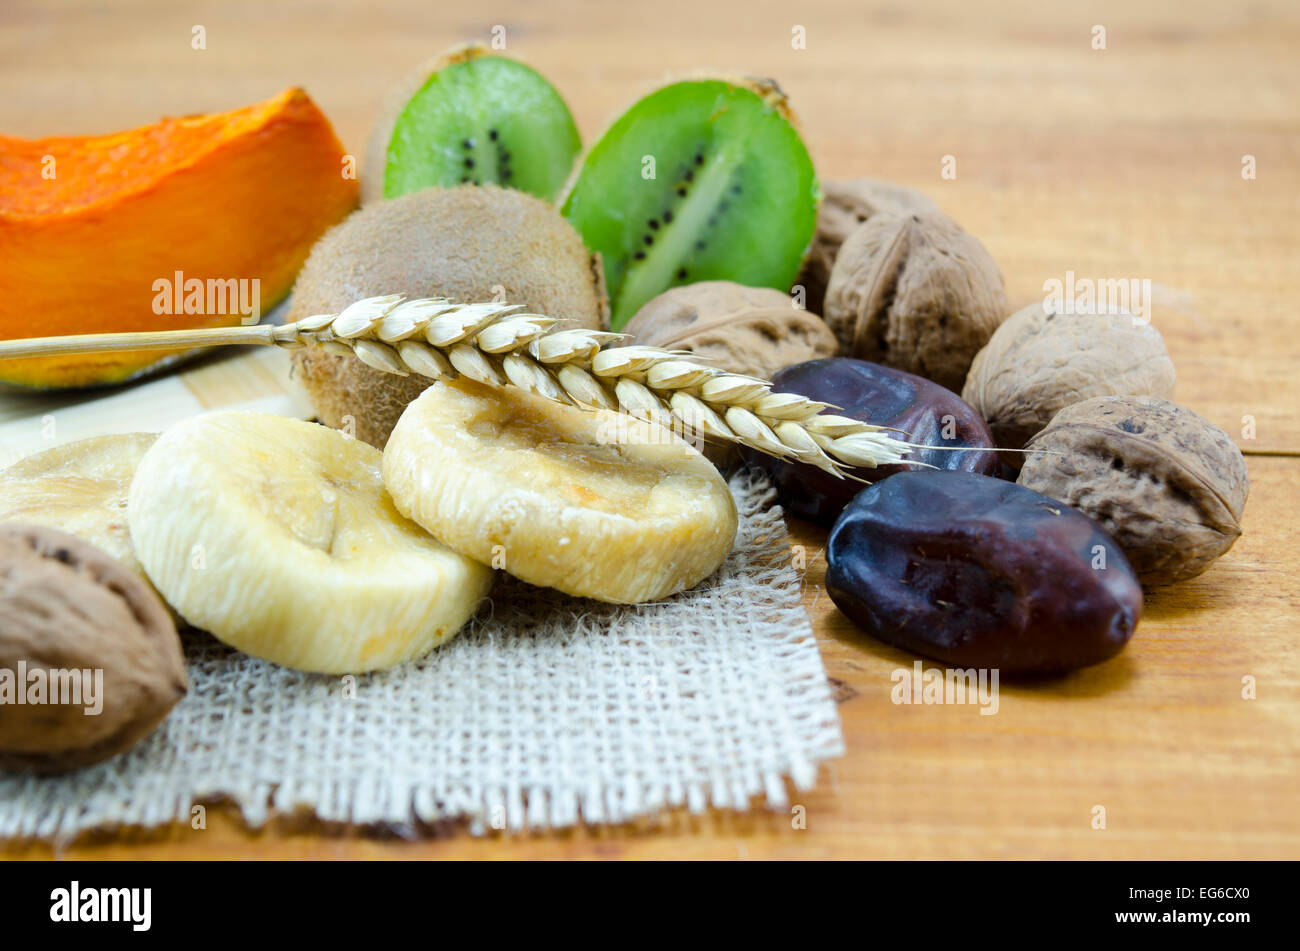 Dried figs, palms, pumpkins with walnuts and kiwis on a wooden table Stock Photo